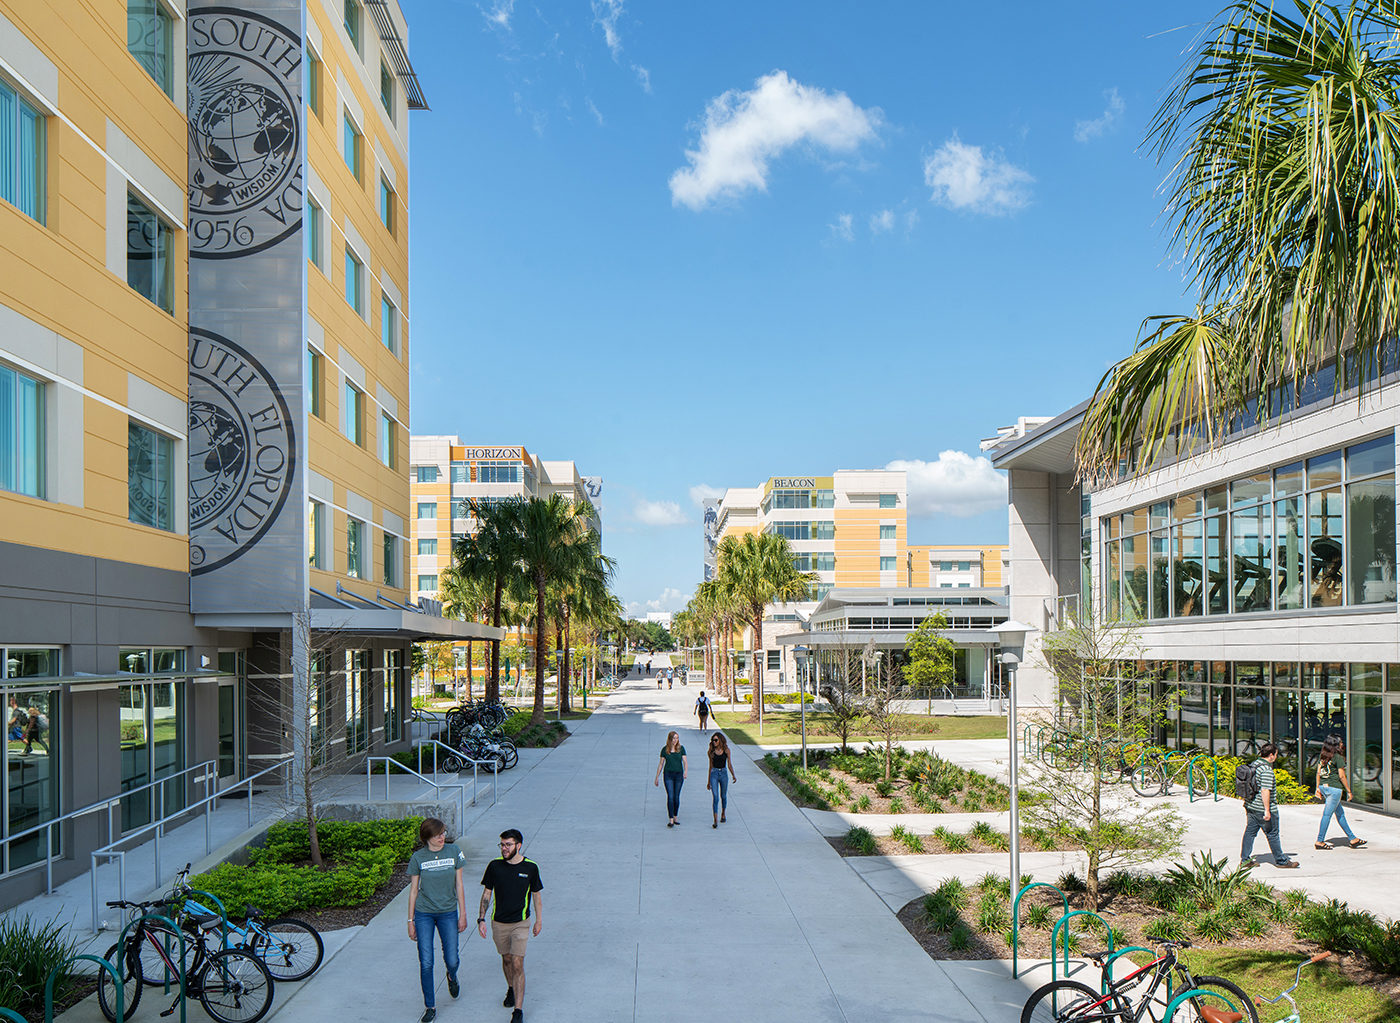 OPINION: USF needs to prioritize affordable, accessible housing to help reach sustainability goals